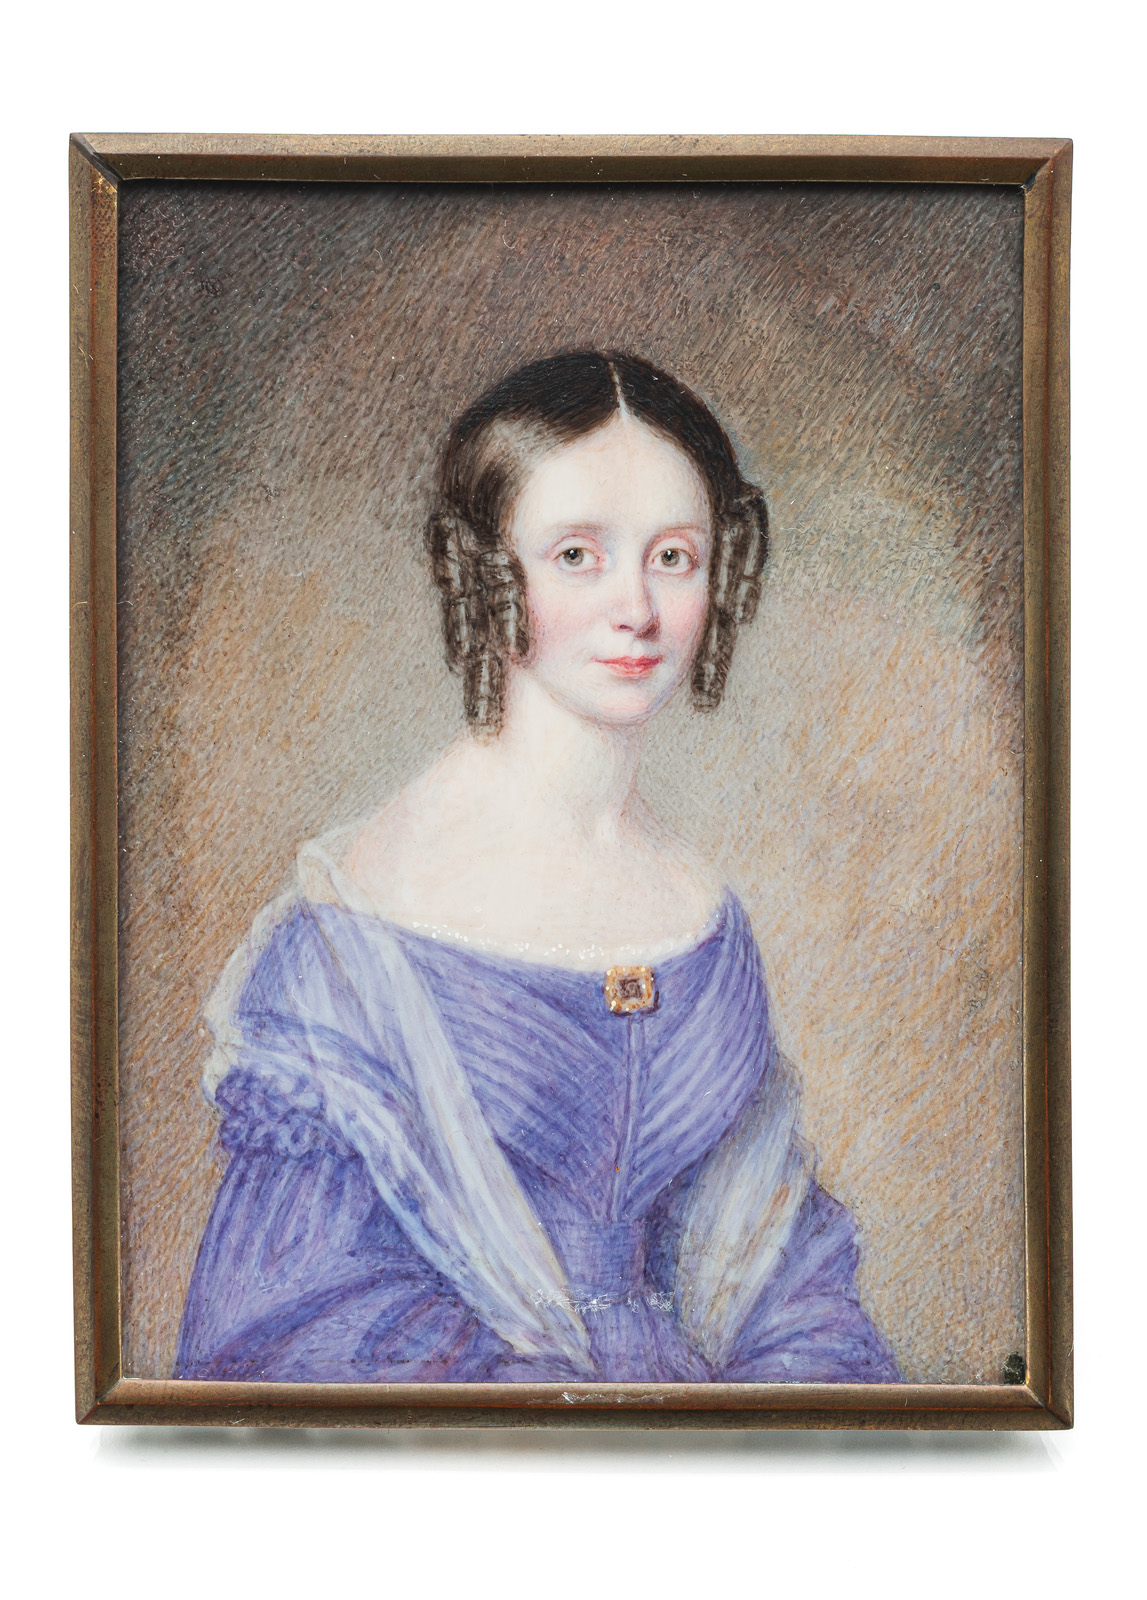 A MINIATURE PORTRAIT OF A LADY IN A VIOLET DRESS